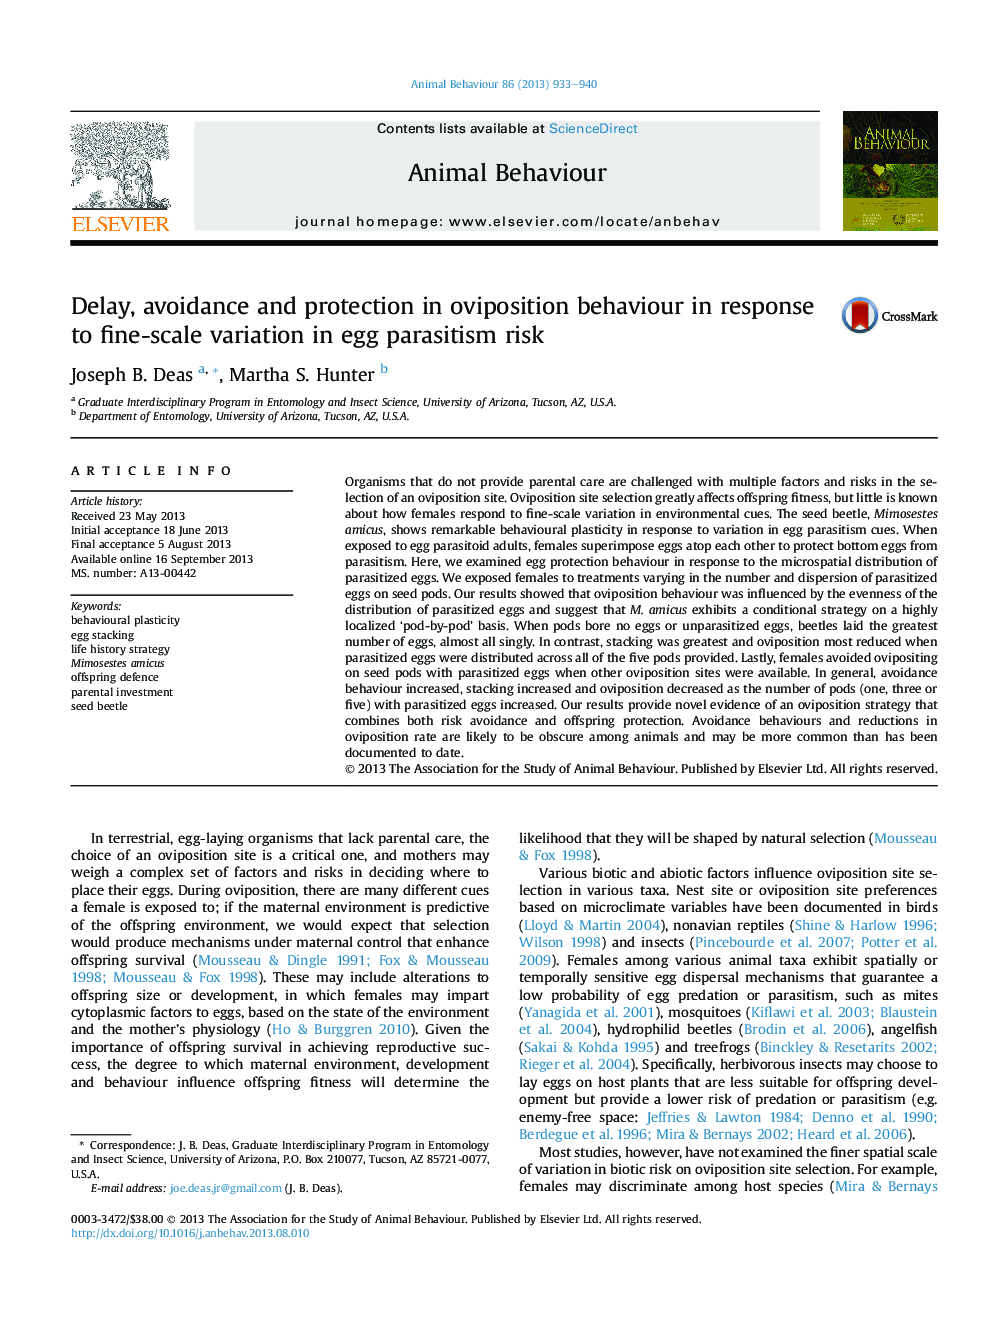 Delay, avoidance and protection in oviposition behaviour in response to fine-scale variation in egg parasitism risk